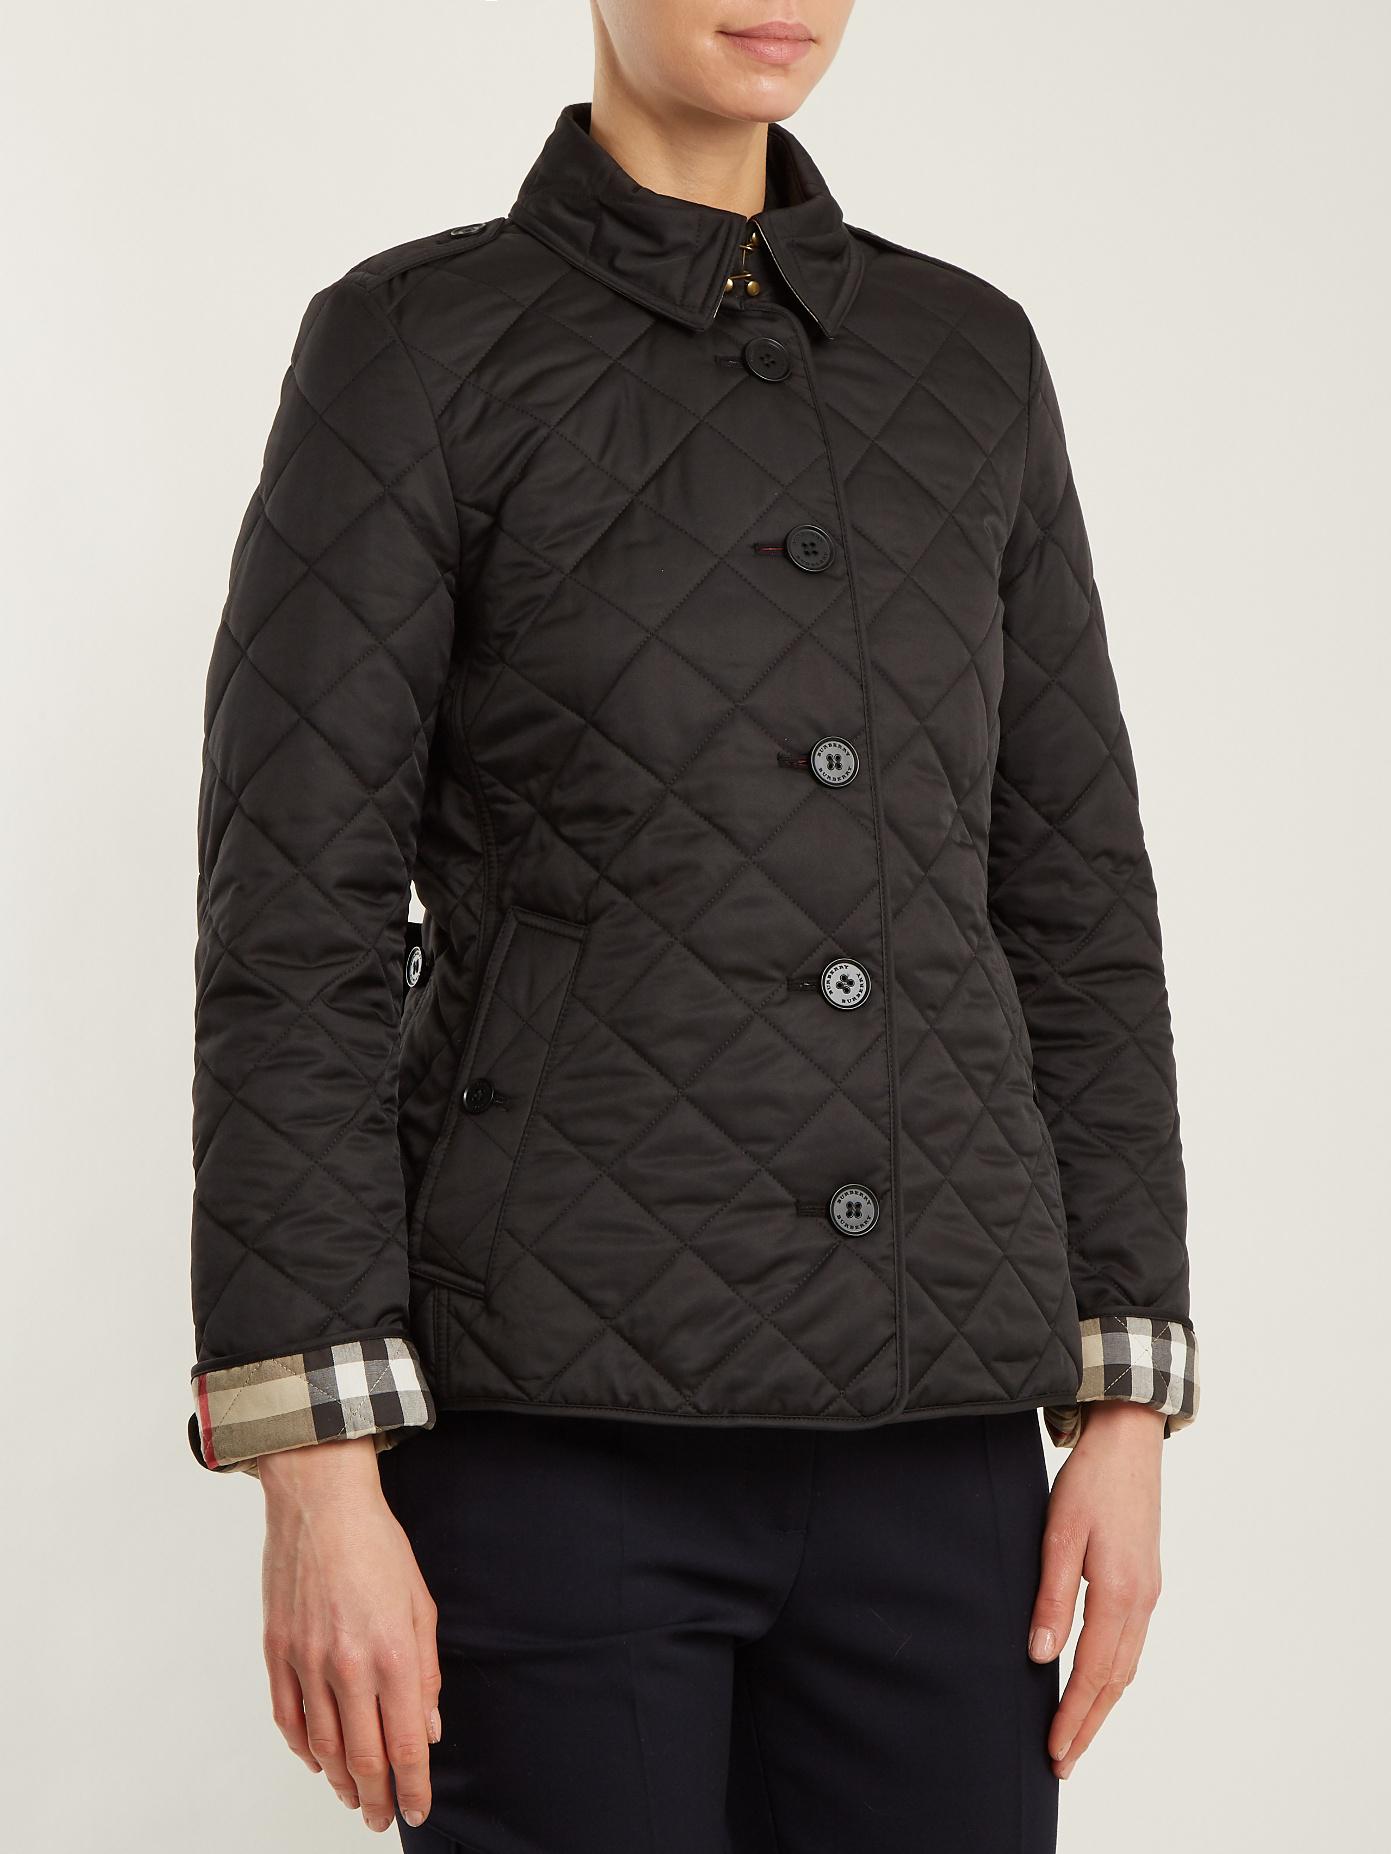 Burberry Cotton Frankby Quilted Jacket in Black - Lyst